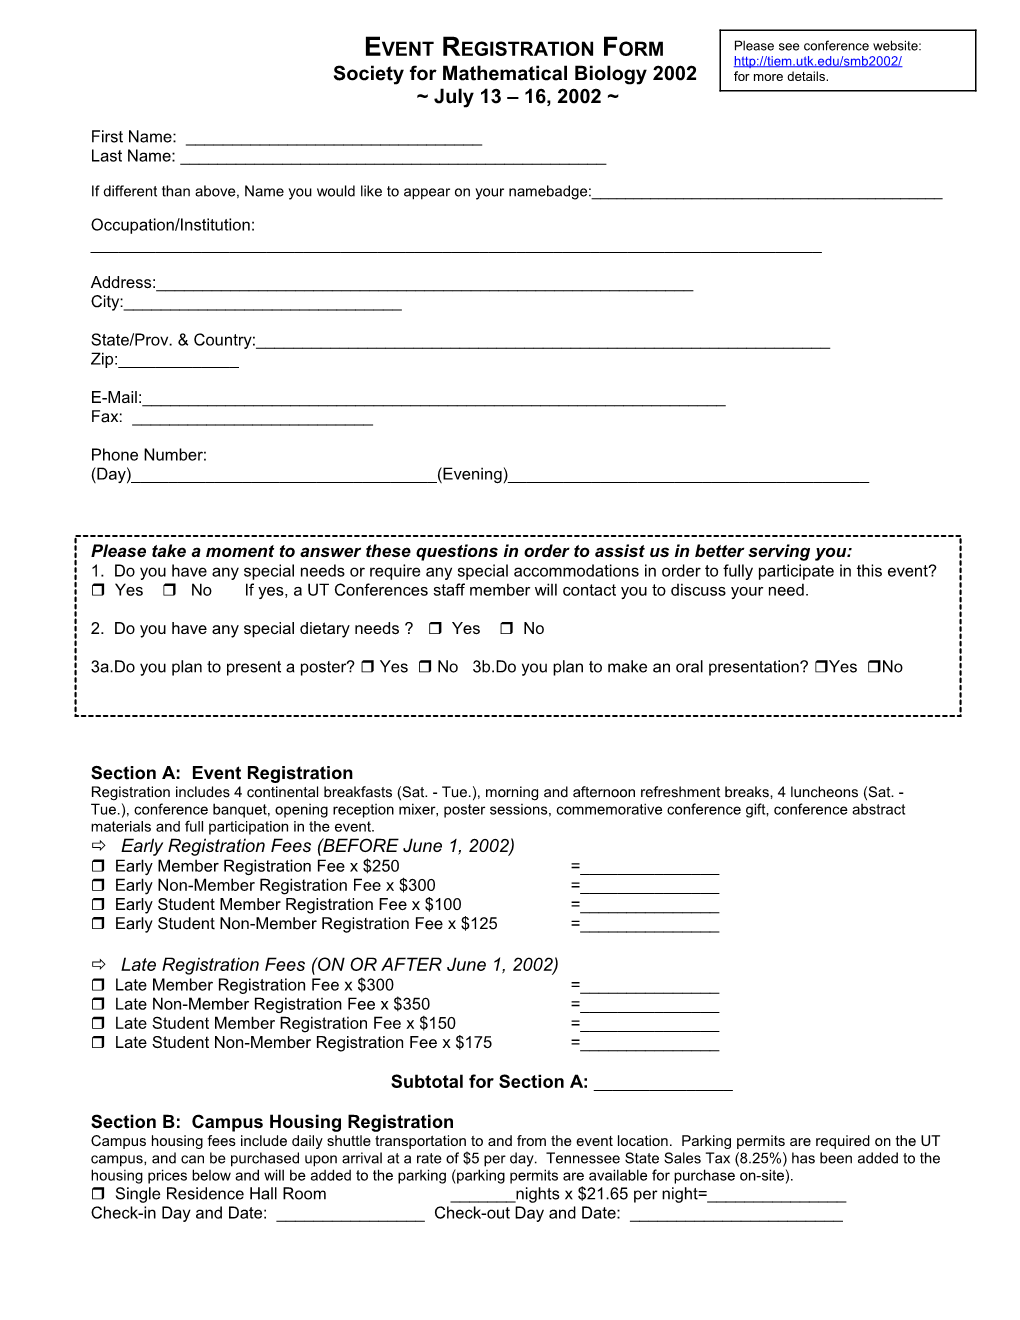 Event Registration Form - for Tax Exempt Institutions